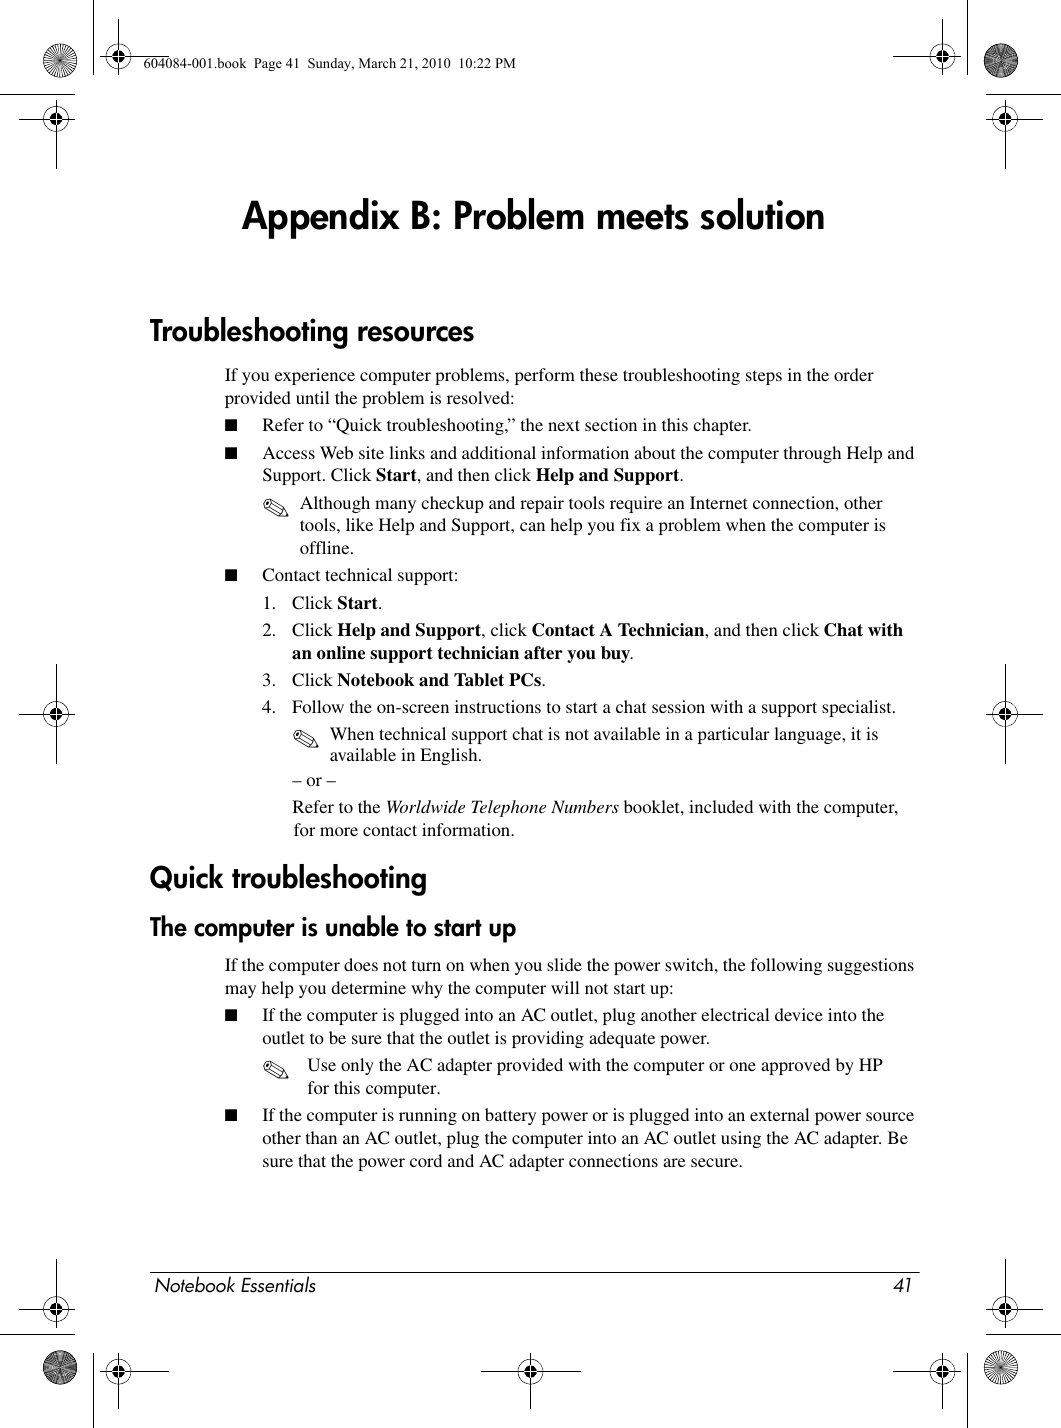 Notebook Essentials 41Appendix B: Problem meets solutionIf you experience computer problems, perform these troubleshooting steps in the order provided until the problem is resolved:■Refer to “Quick troubleshooting,” the next section in this chapter.■Access Web site links and additional information about the computer through Help and Support. Click Start, and then click Help and Support.✎Although many checkup and repair tools require an Internet connection, other tools, like Help and Support, can help you fix a problem when the computer is offline.■Contact technical support:1. Click Start.2. Click Help and Support, click Contact A Technician, and then click Chat with an online support technician after you buy.3. Click Notebook and Tablet PCs.4. Follow the on-screen instructions to start a chat session with a support specialist.✎When technical support chat is not available in a particular language, it is available in English.– or –Refer to the Worldwide Telephone Numbers booklet, included with the computer, for more contact information.The computer is unable to start upIf the computer does not turn on when you slide the power switch, the following suggestions may help you determine why the computer will not start up:■If the computer is plugged into an AC outlet, plug another electrical device into the outlet to be sure that the outlet is providing adequate power.✎Use only the AC adapter provided with the computer or one approved by HP for this computer. ■If the computer is running on battery power or is plugged into an external power source other than an AC outlet, plug the computer into an AC outlet using the AC adapter. Be sure that the power cord and AC adapter connections are secure.Troubleshooting resourcesQuick troubleshooting604084-001.book  Page 41  Sunday, March 21, 2010  10:22 PM